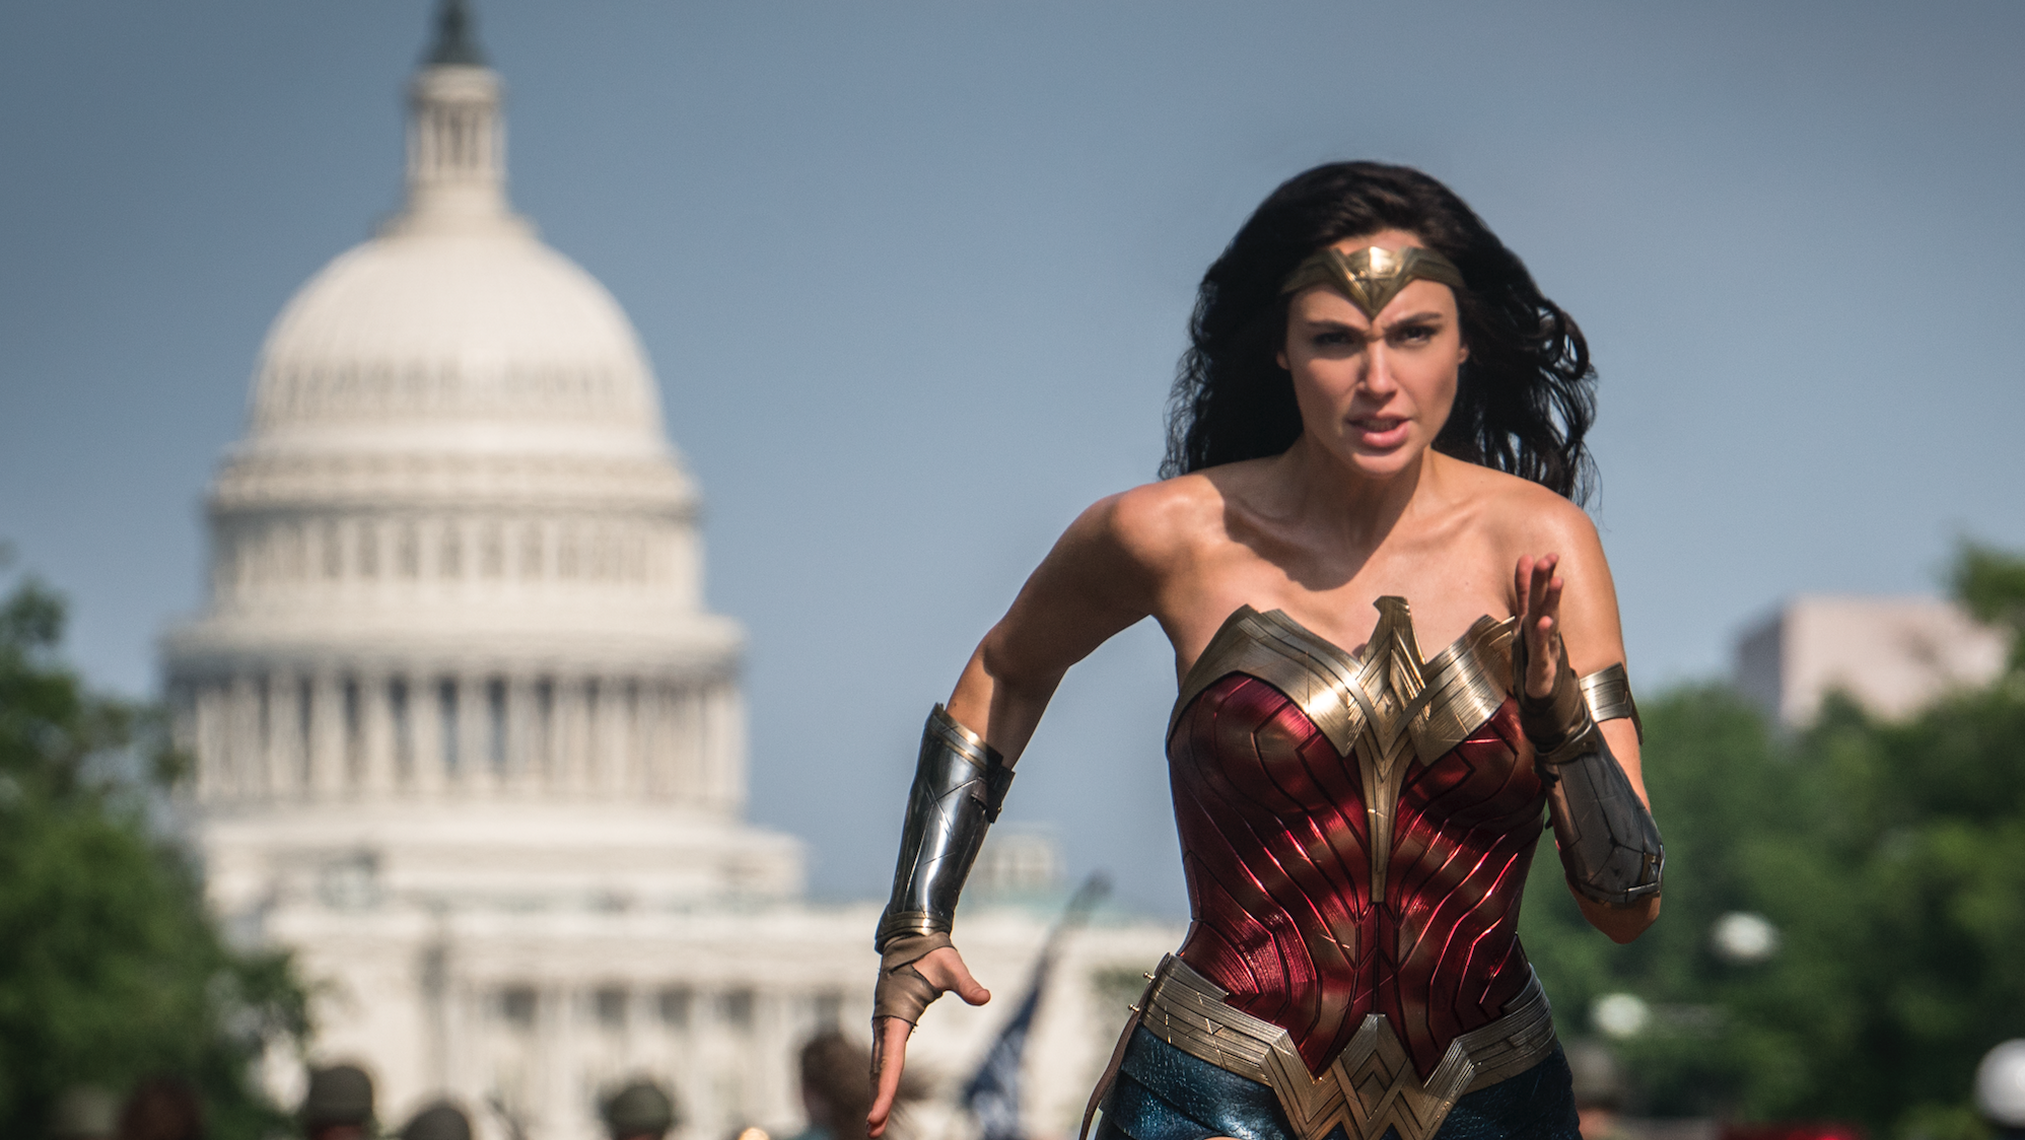 Love “Wonder Woman”? Find Similar Casting Calls + Auditions